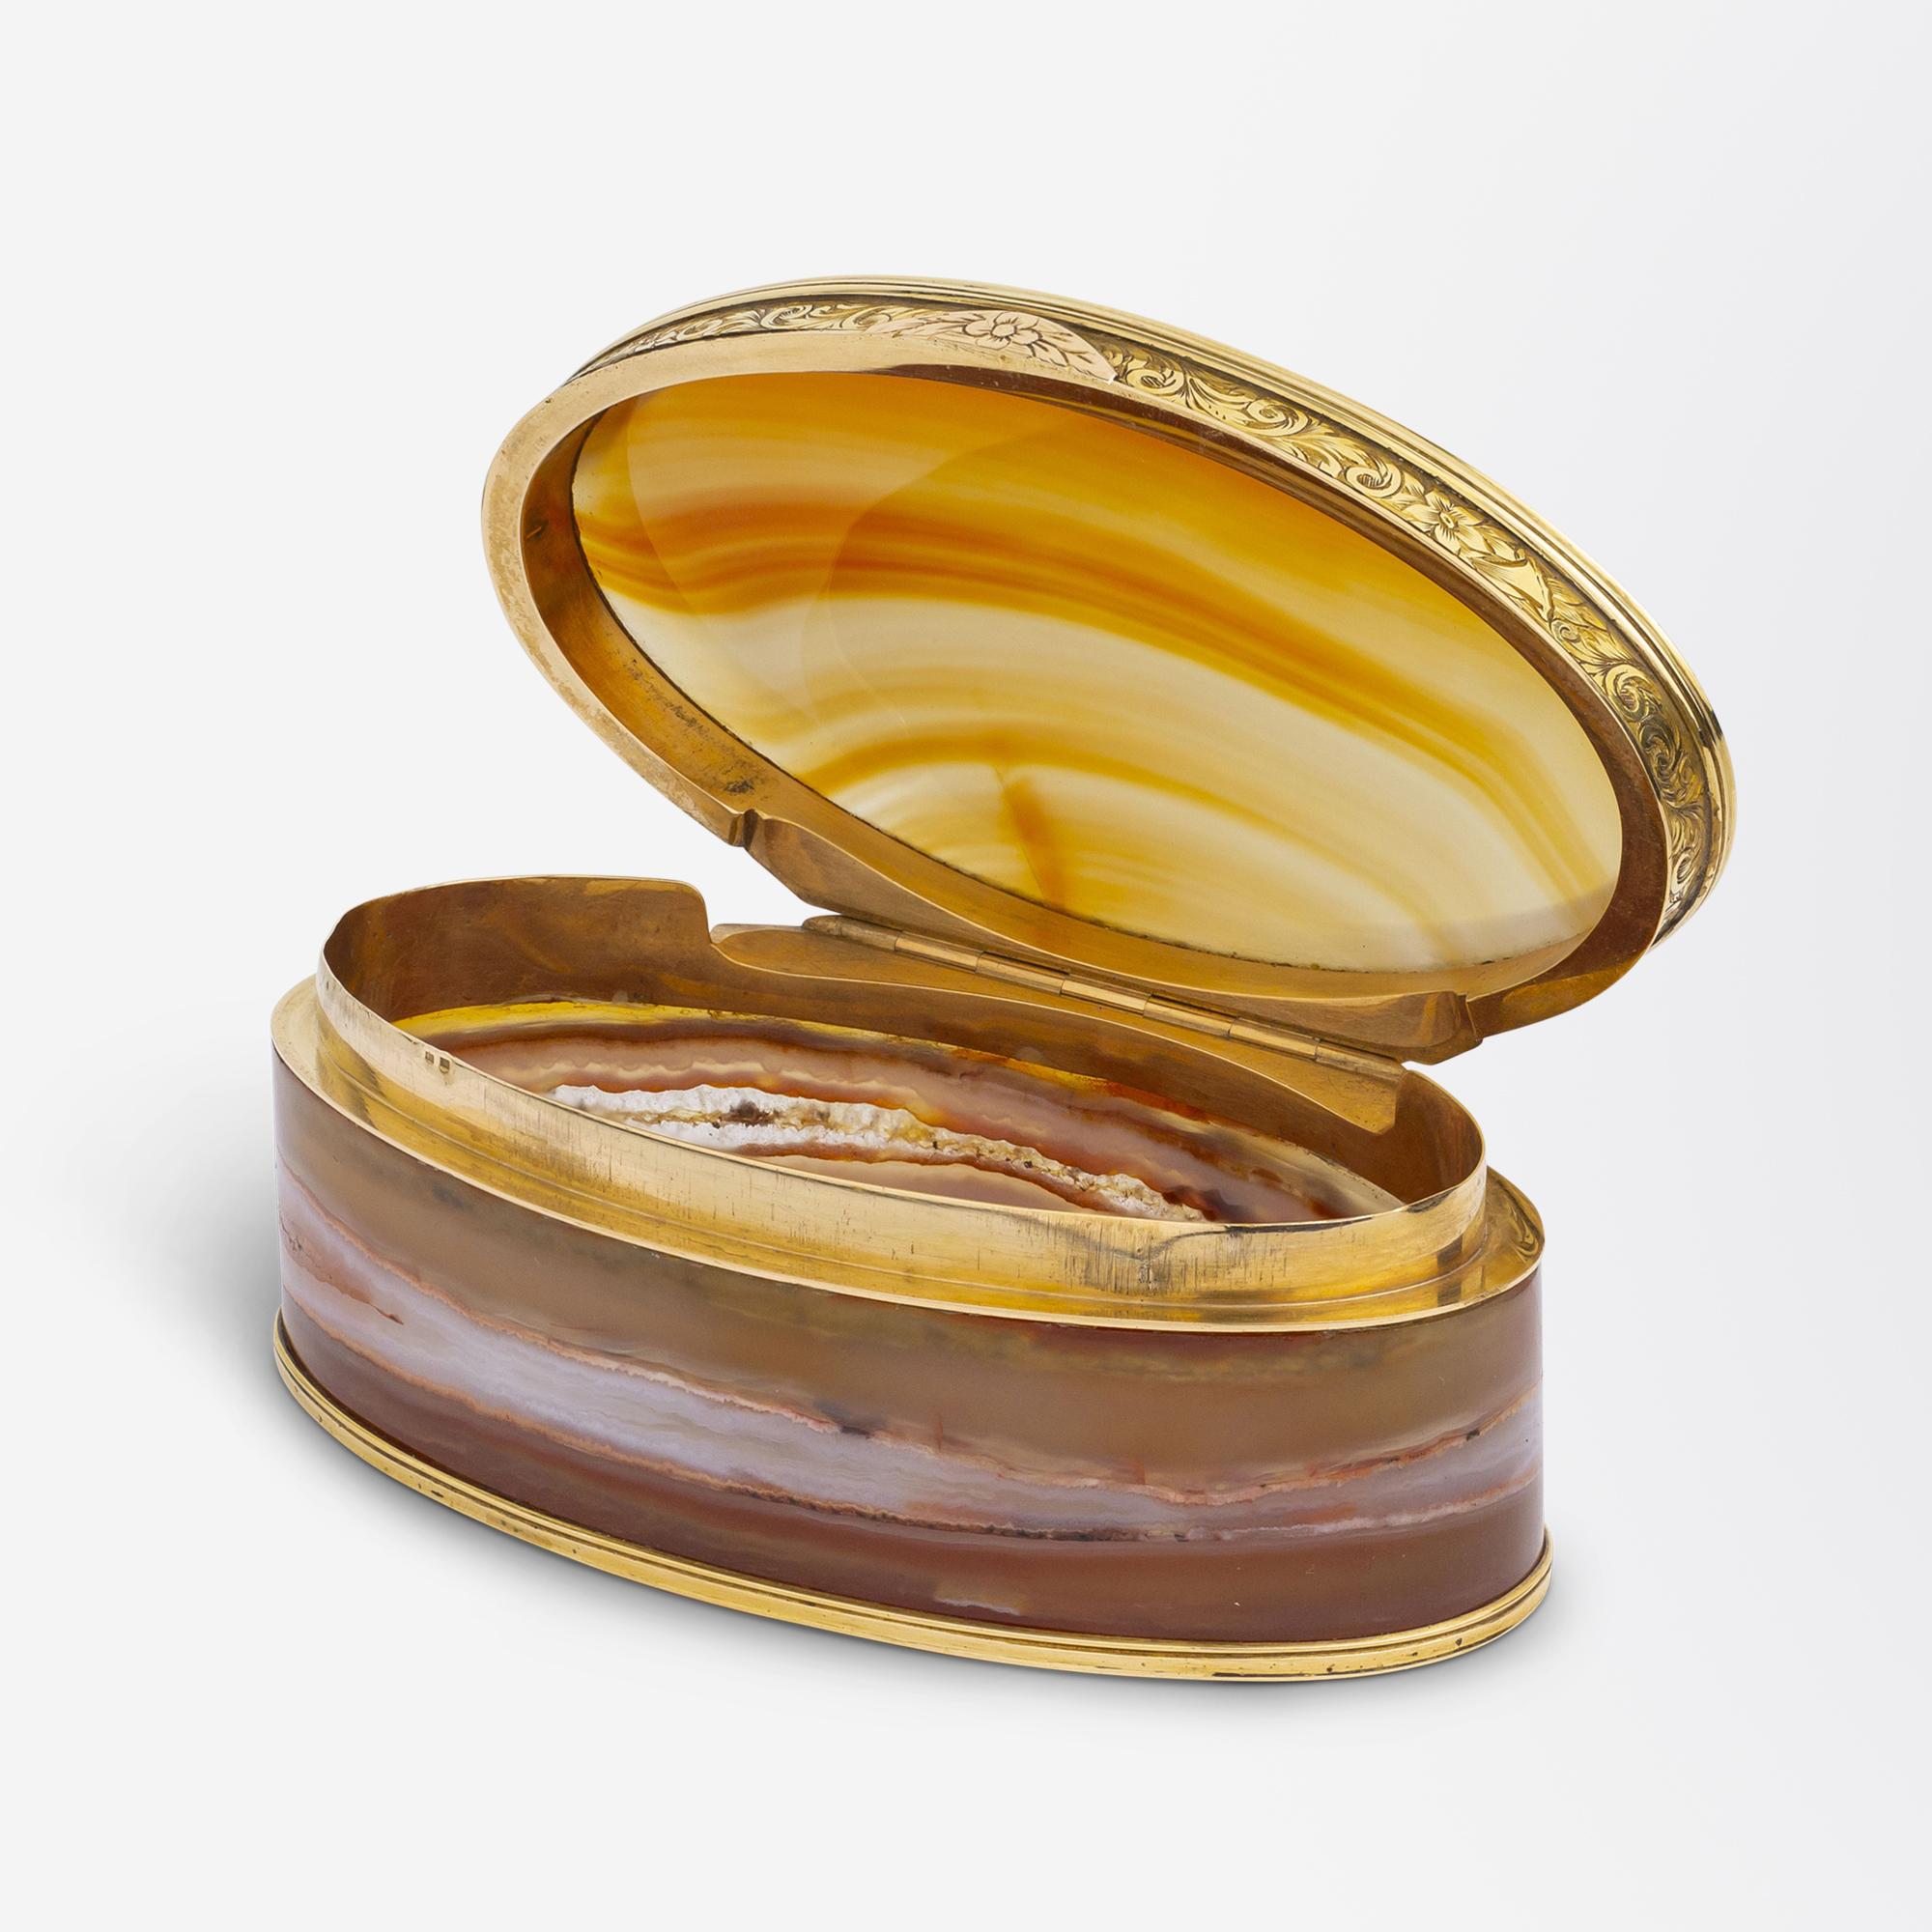 This carnelian agate and gold box was imported into France and is hallmarked with a French import mark. The oval box features what is likely 9 karat yellow gold mounts, which are on the bottom of the box, the top of the lid, and the inside of the